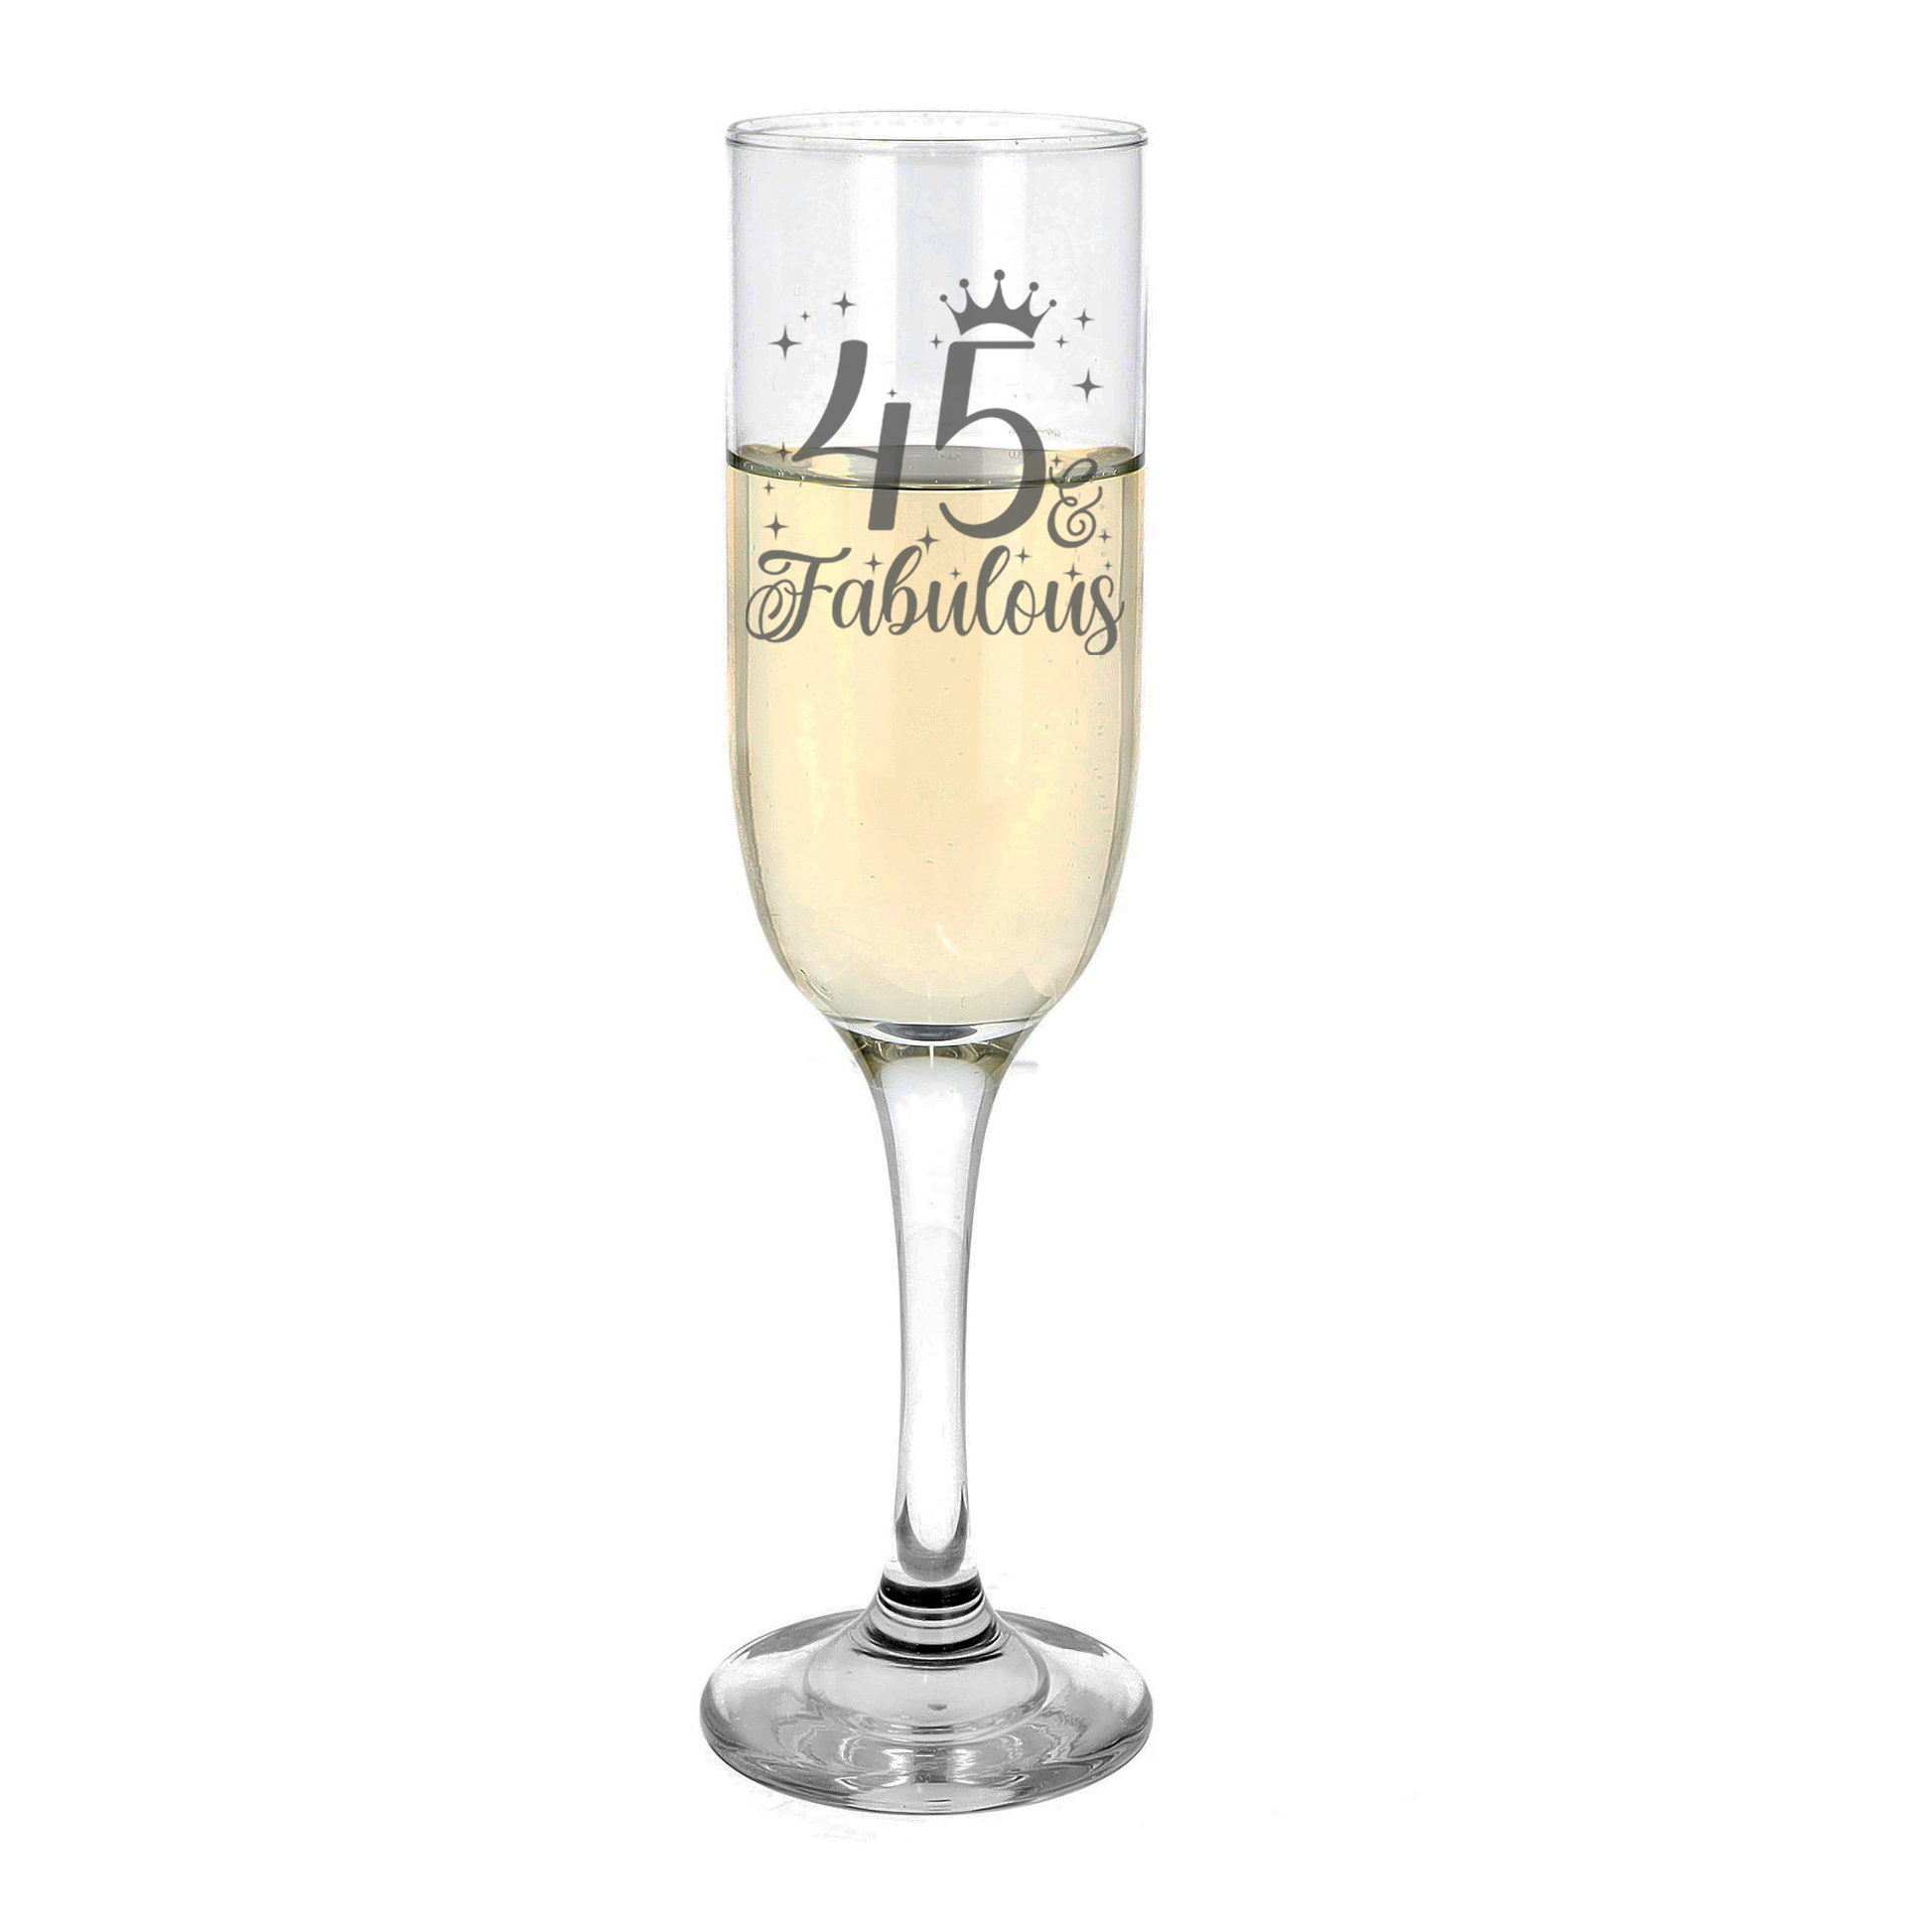 45 & Fabulous Engraved Champagne Glass and/or Coaster Set  - Always Looking Good -   